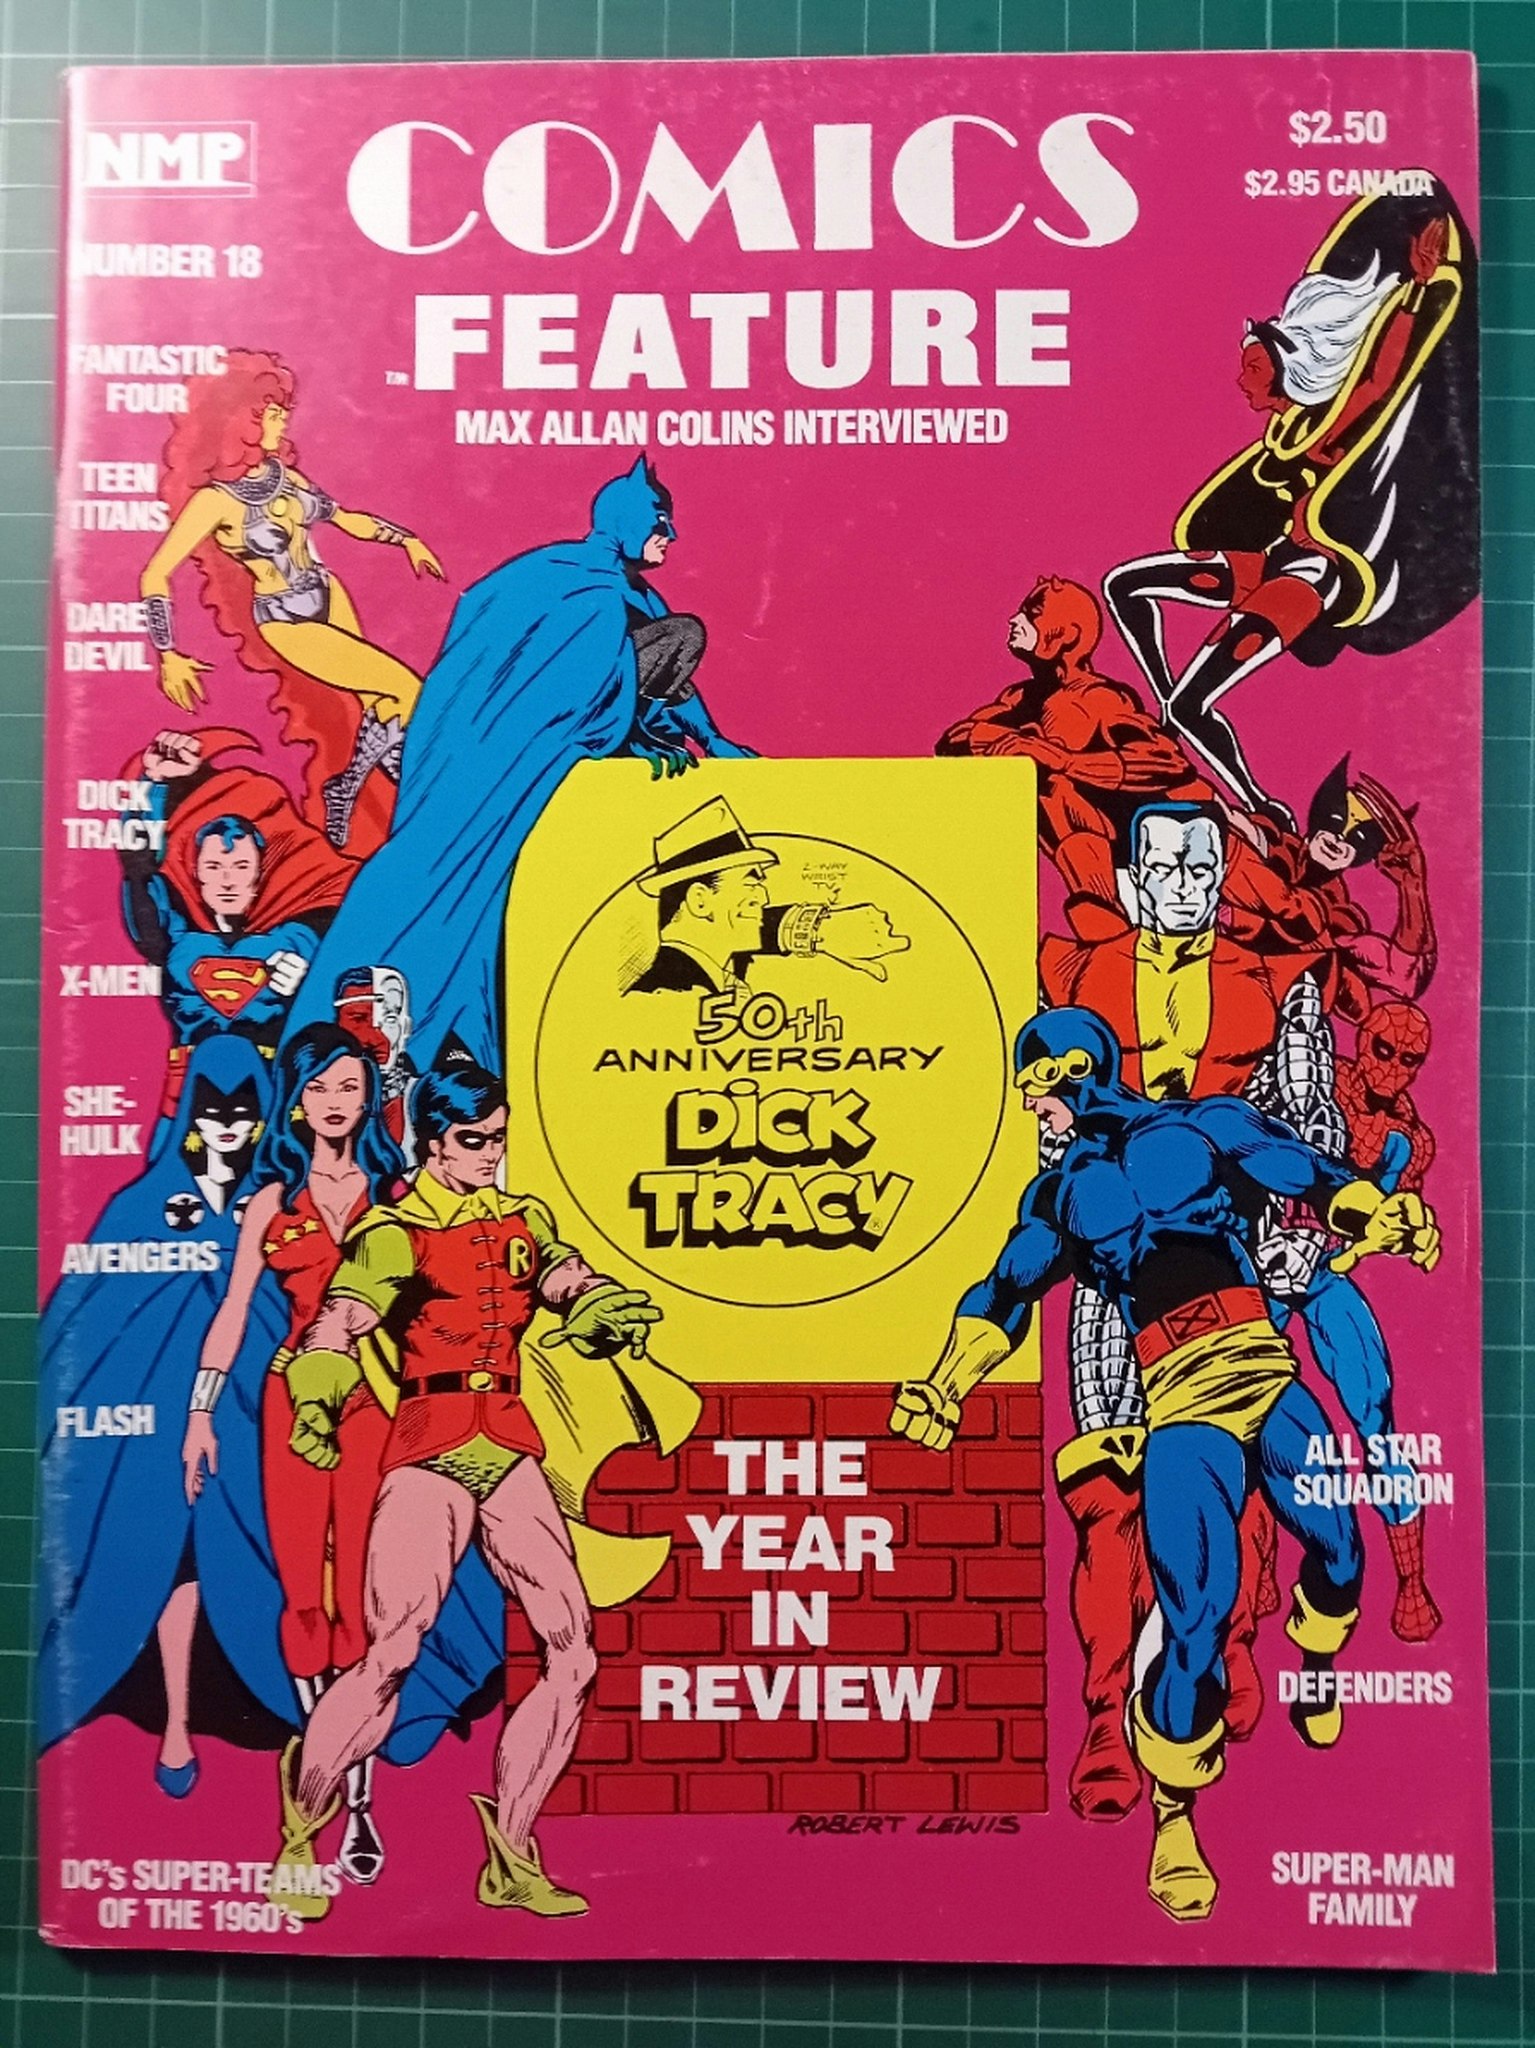 Comic feature special summer issue 1983 (USA)